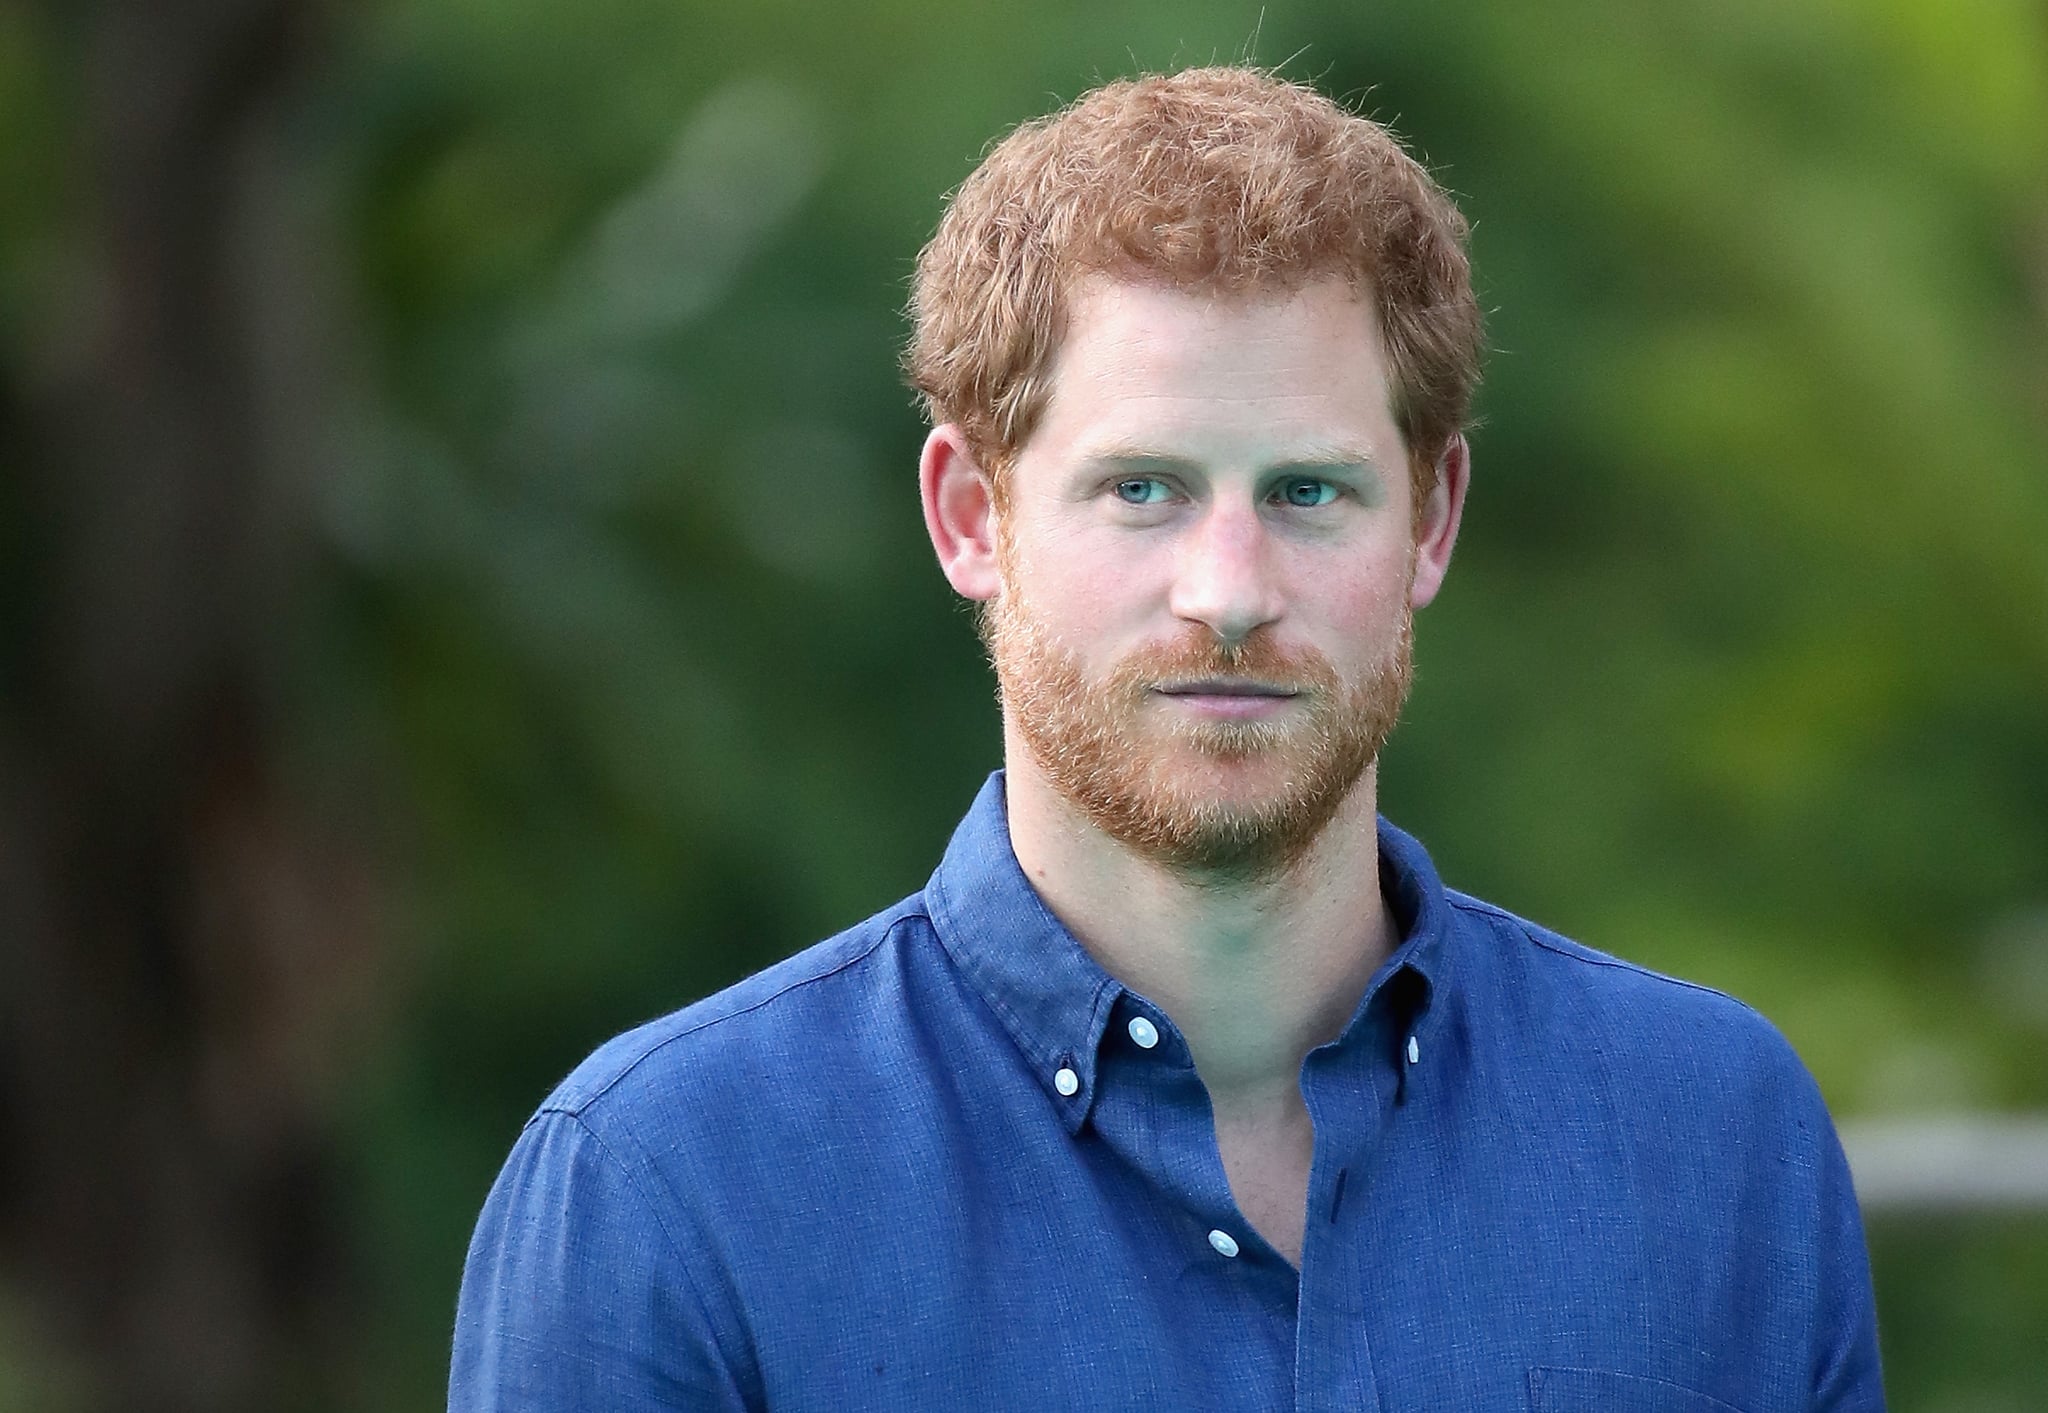 Prince Harry Newsweek Interview Quotes June 2017 | POPSUGAR Celebrity